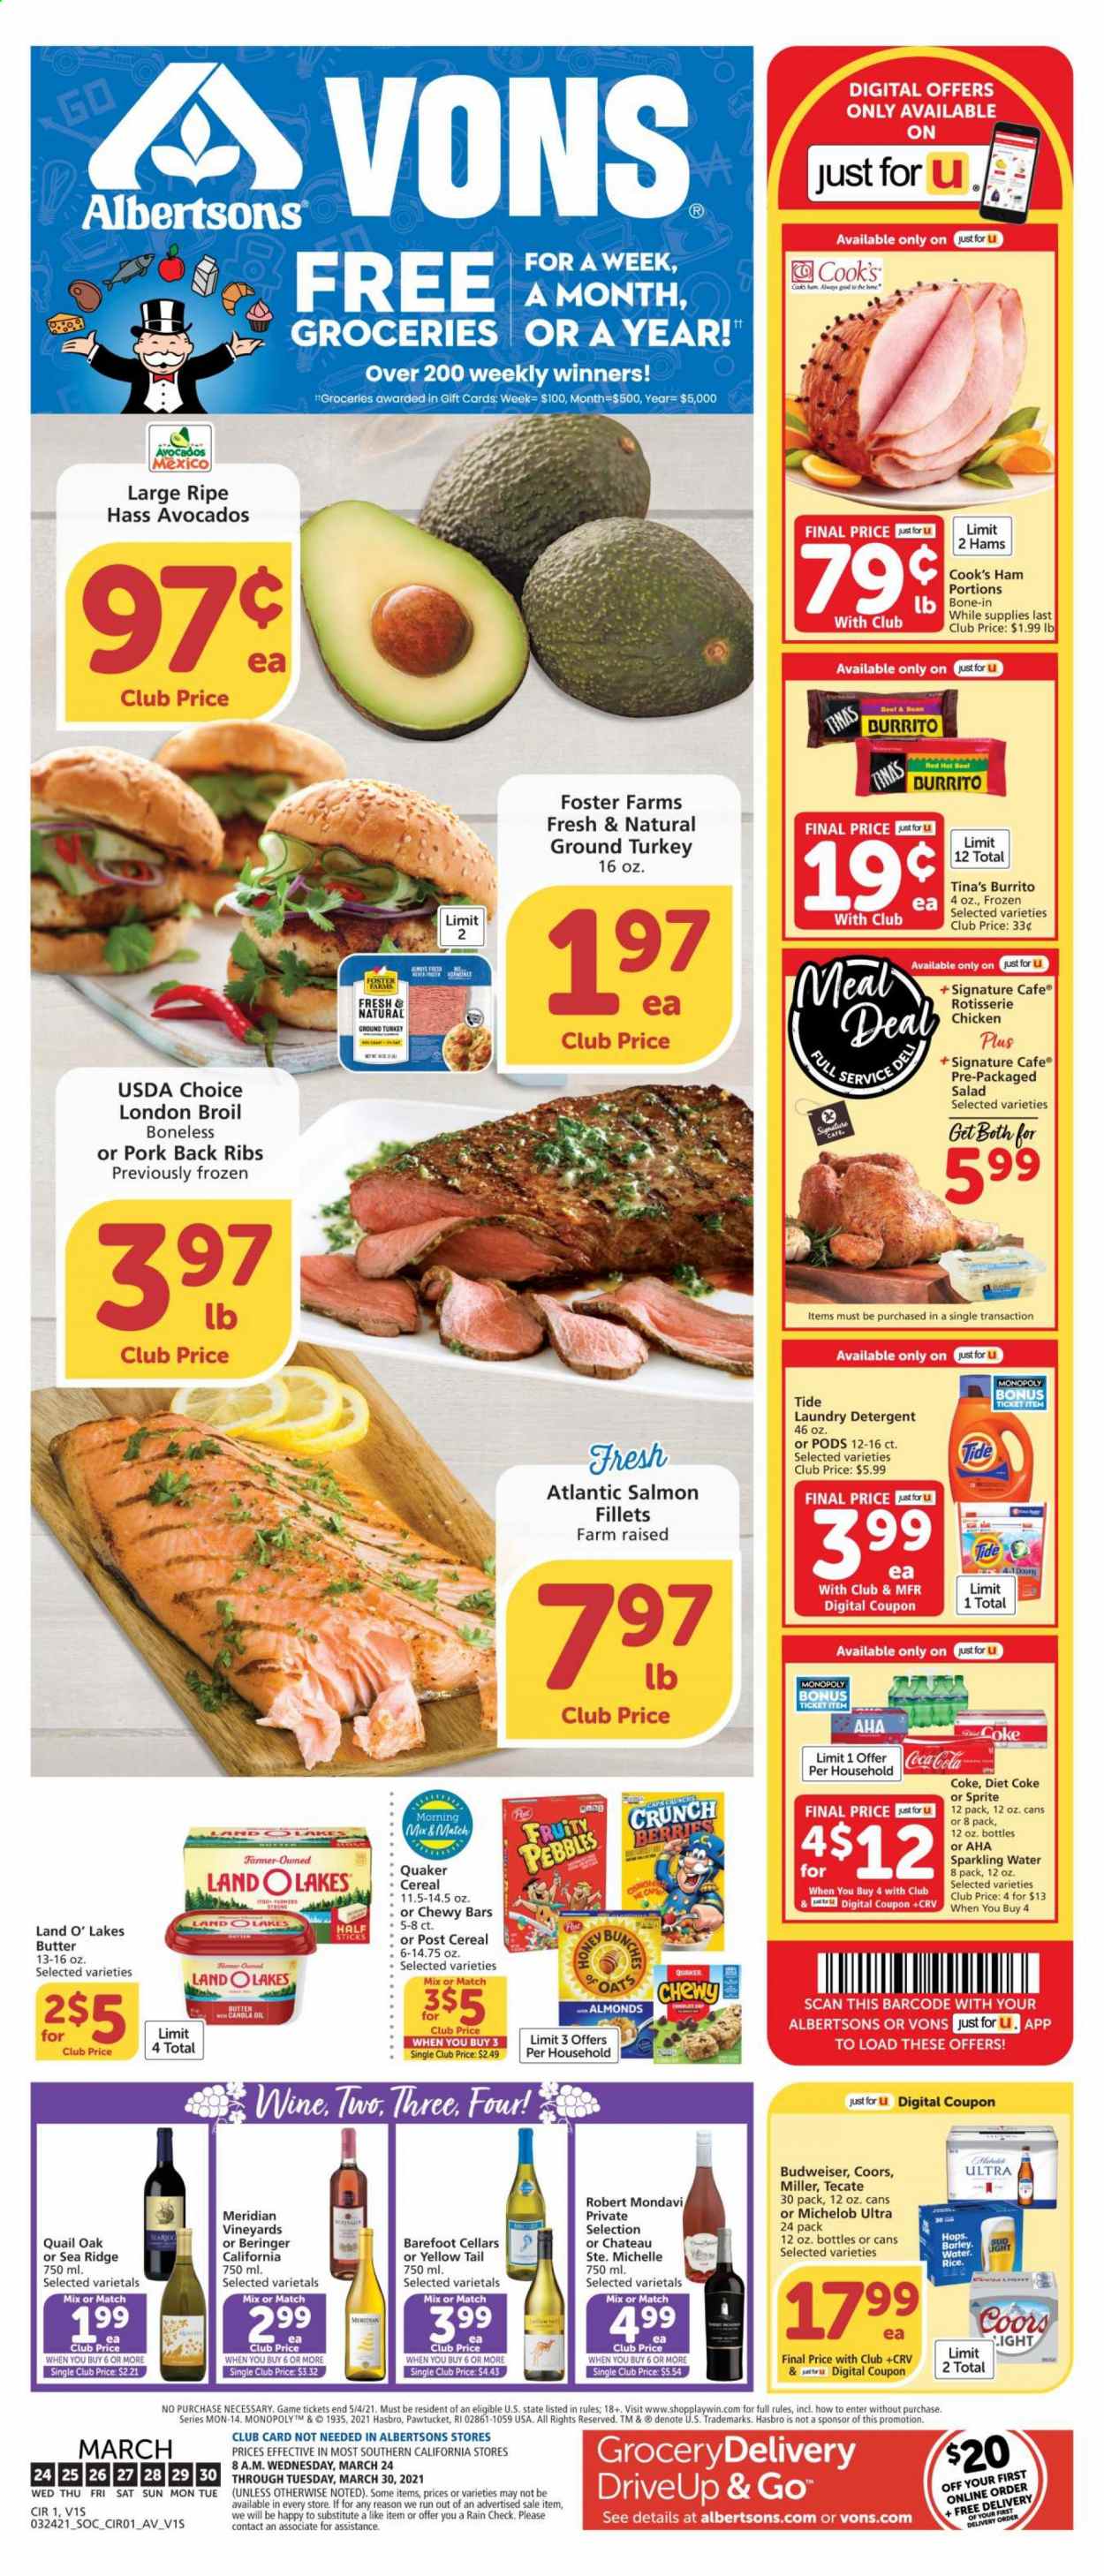 thumbnail - Vons Flyer - 03/24/2021 - 03/30/2021 - Sales products - ground turkey, pork meat, pork back ribs, salmon, salmon fillet, salad, burrito, Quaker, ham, butter, Ola, beans, oats, cereals, Fruity Pebbles, canola oil, almonds, Coca-Cola, Sprite, Diet Coke, sparkling water, wine, Quail Oak, Cook's, beer, Budweiser, Coors, Michelob, Bud Light, Miller, detergent, Tide, laundry detergent, Monopoly, Hasbro, avocado. Page 1.